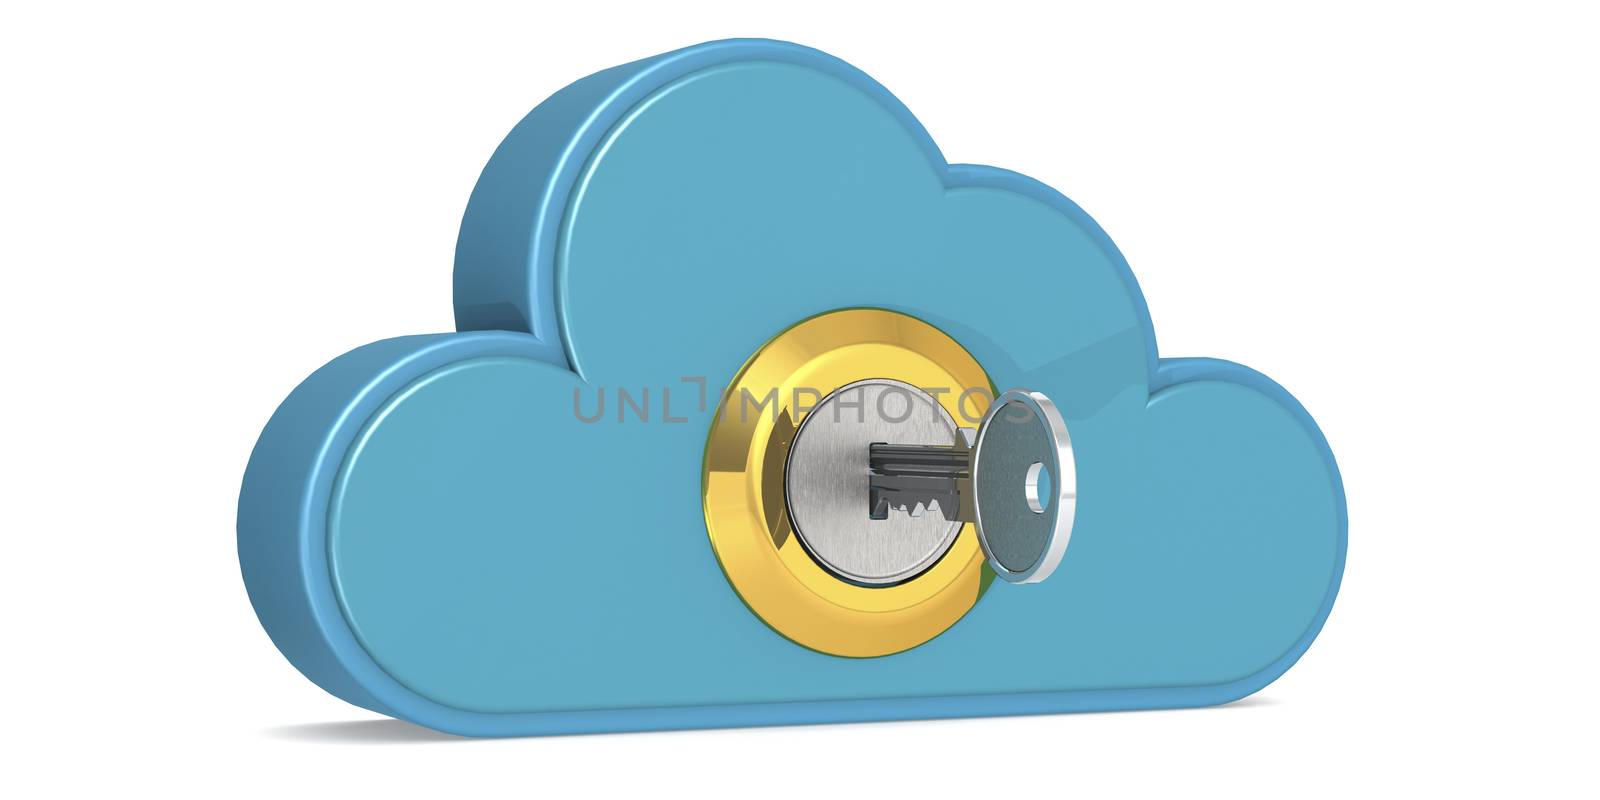 Security concept of cloud computing with metal key by tang90246